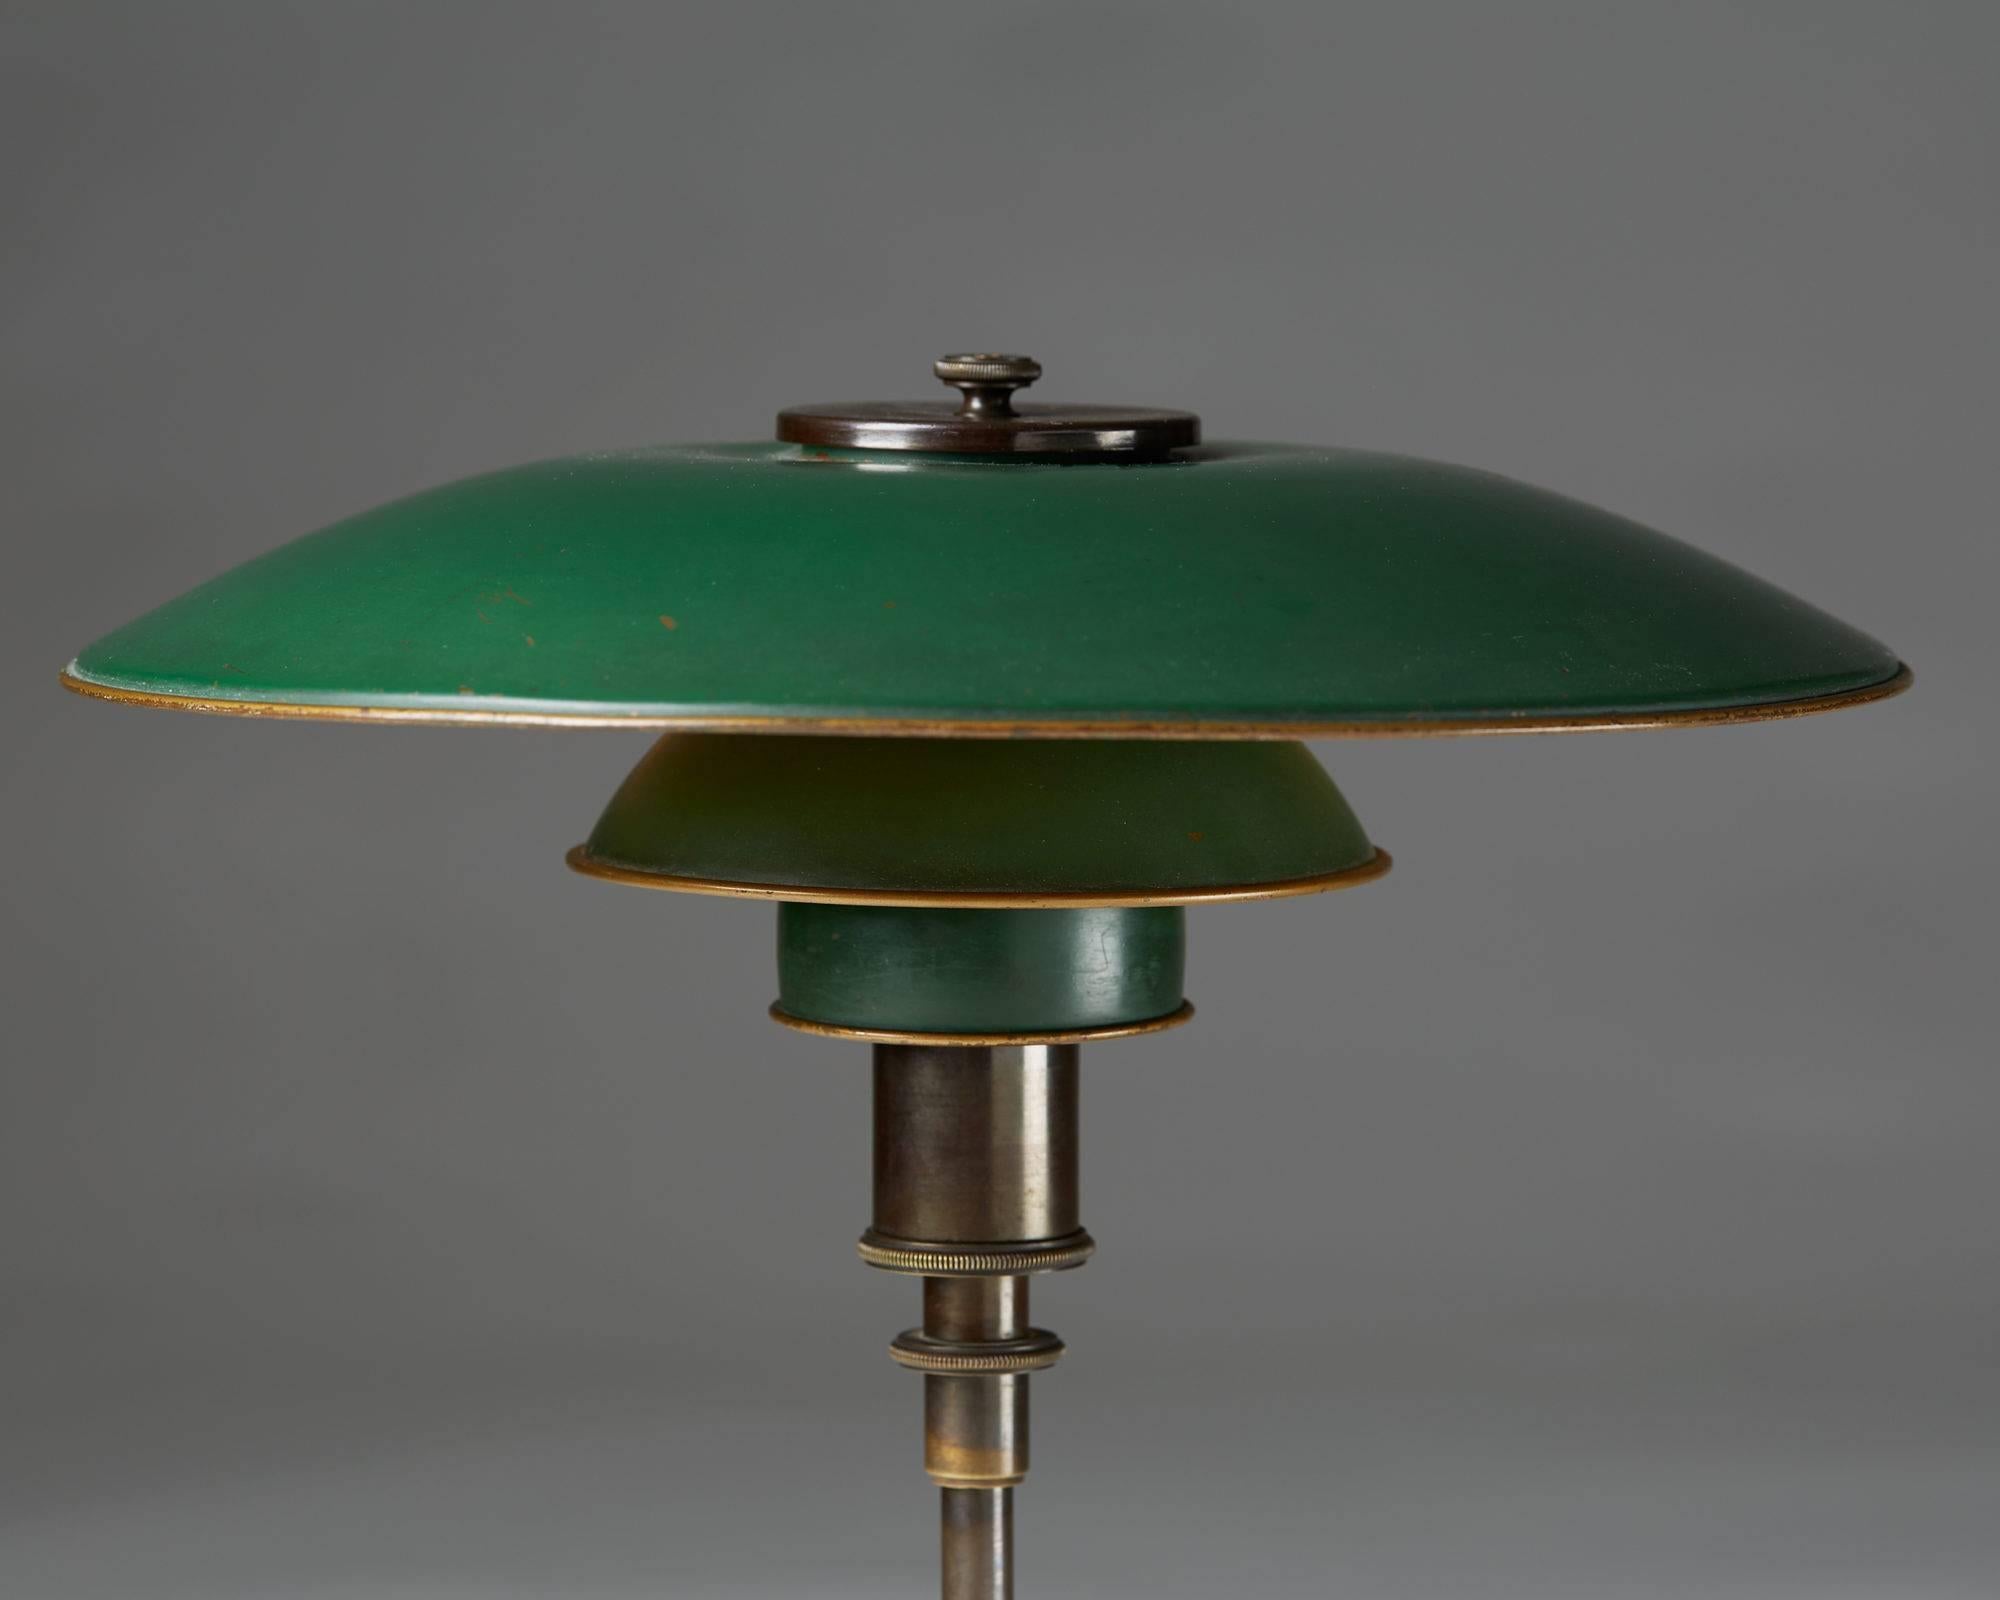 Table lamp PH 3/2 designed by Poul Henningsen for Louis Poulsen, Denmark, 1926. Lacquered copper shades and patinated bronze lamp foot.
Stamped: PAT. APPL.
    